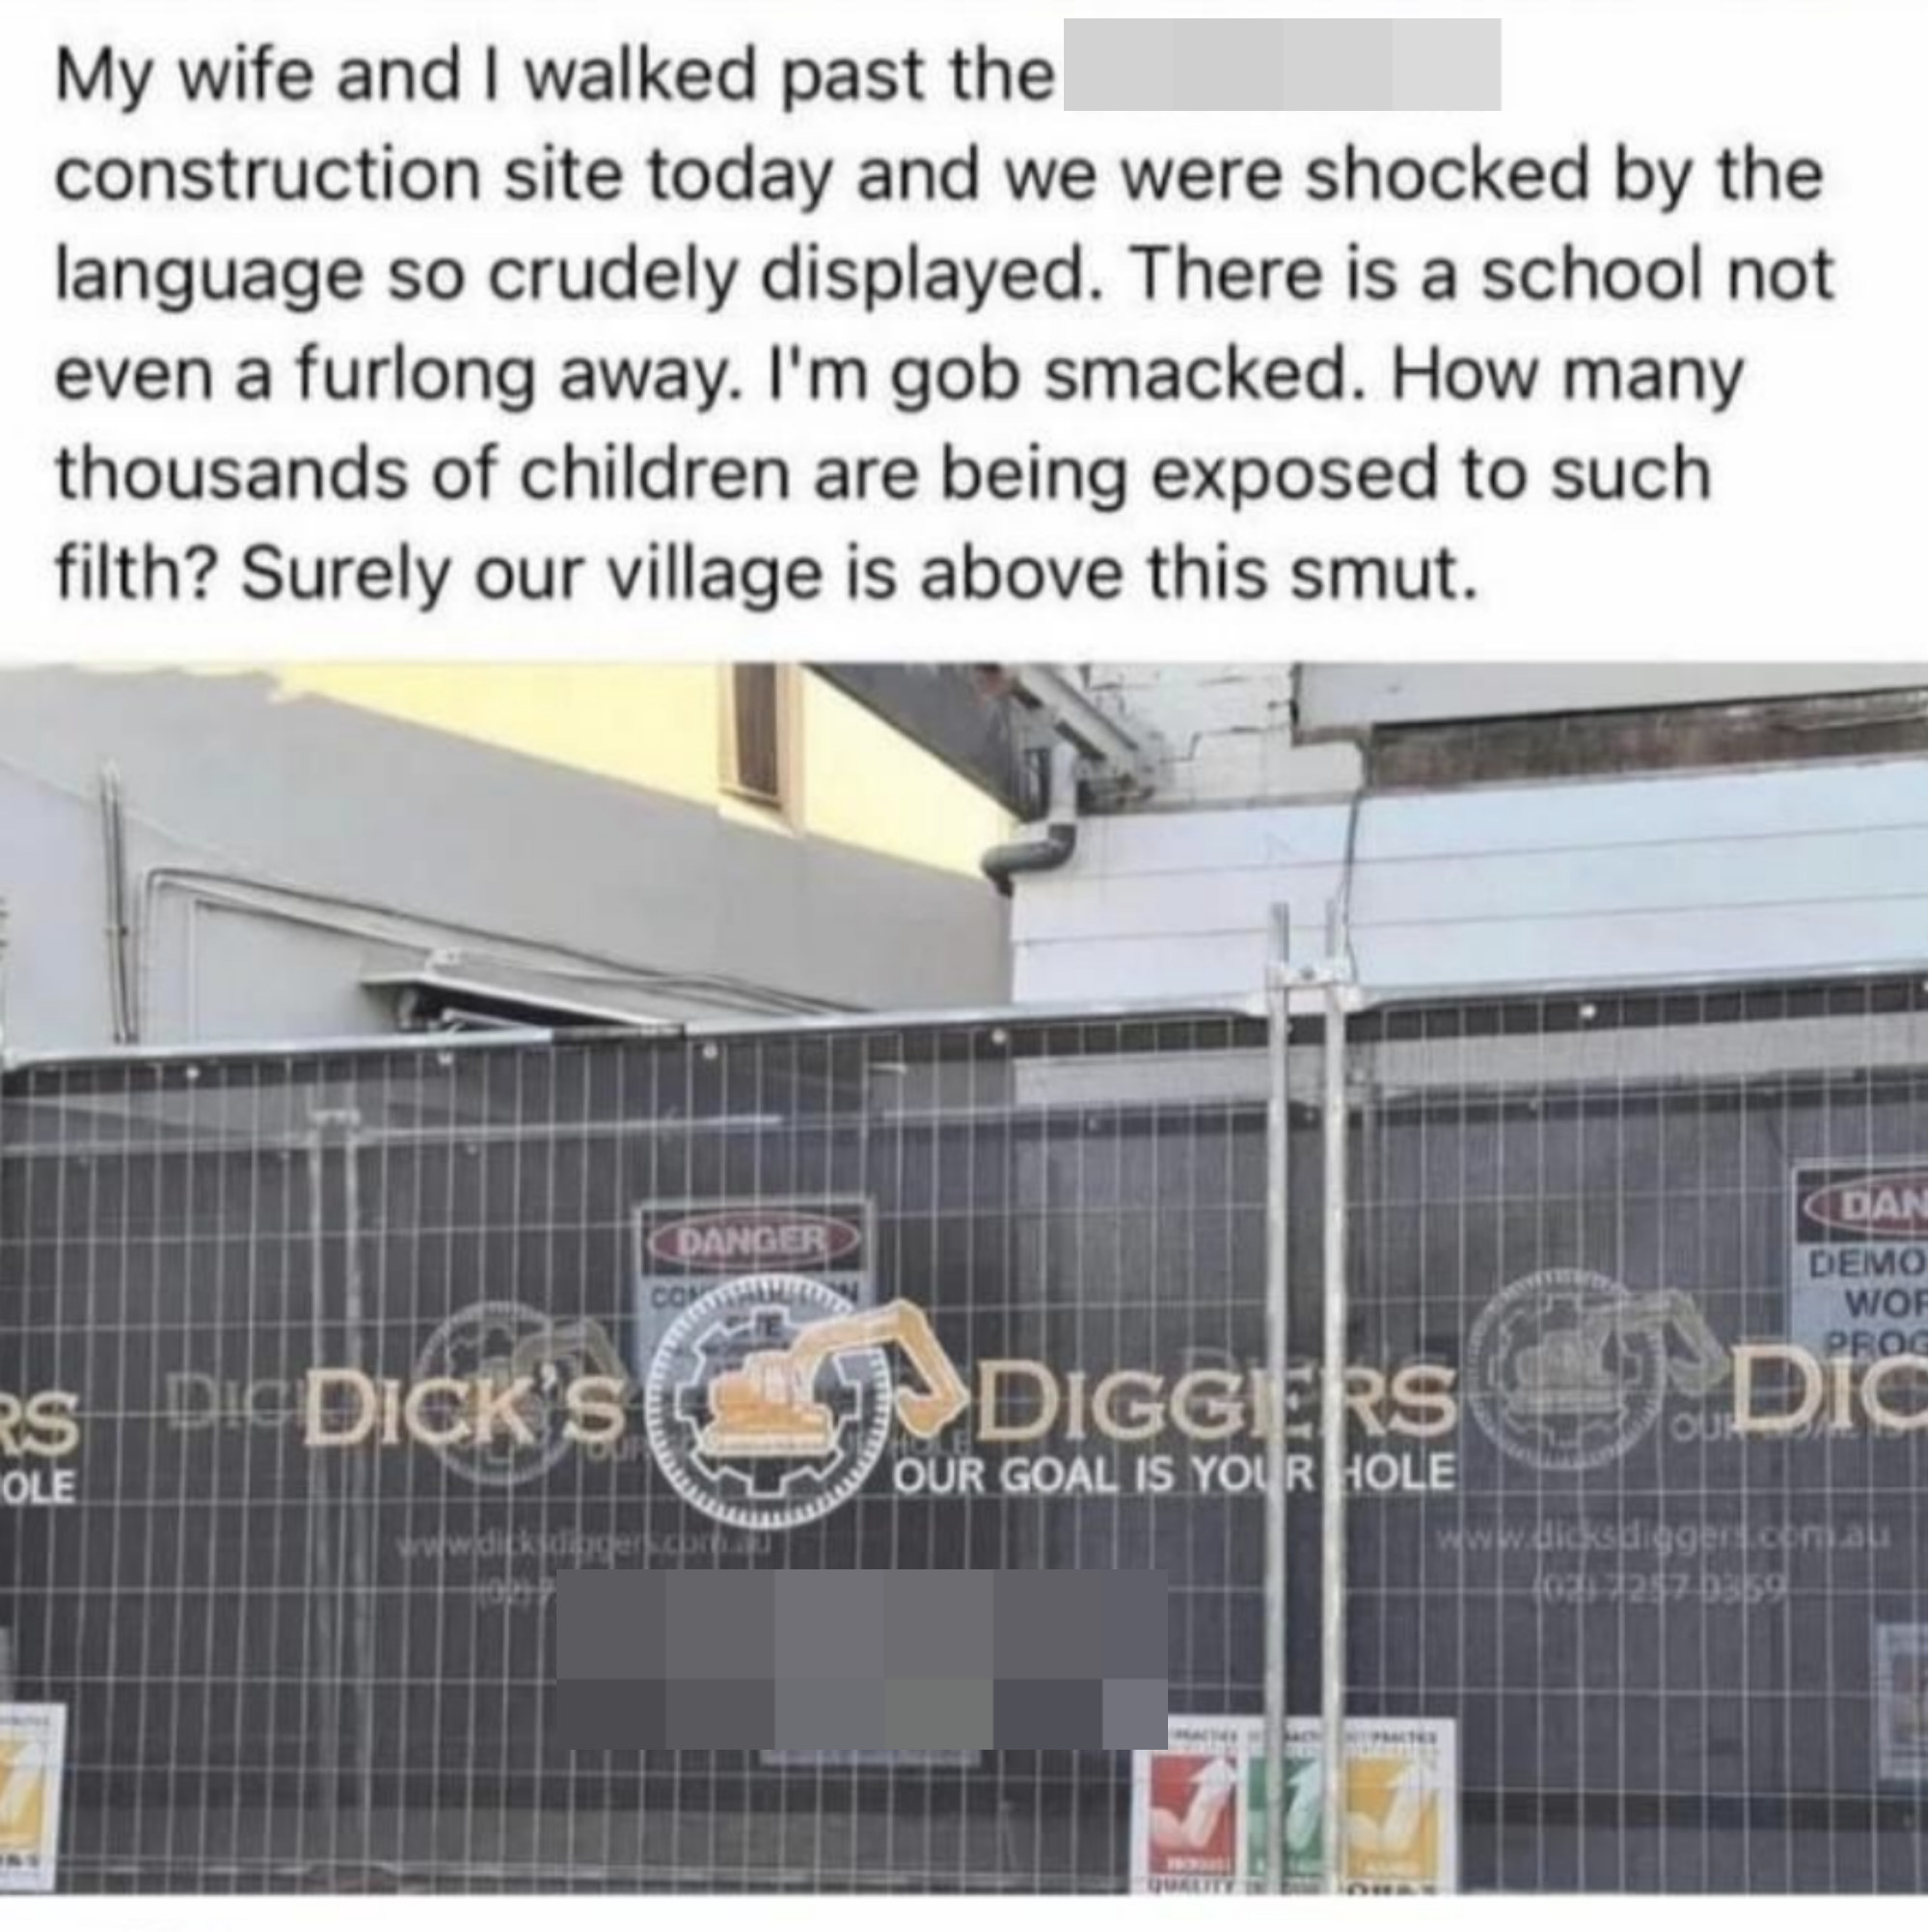 &quot;Dick&#x27;s Diggers: Our Goal Is Your Hole&quot; offends this person, who says they were &quot;shocked by the language so crudely displayed,&quot; especially with a school nearby: &quot;How many thousands of children are being exposed to such filth?&quot;